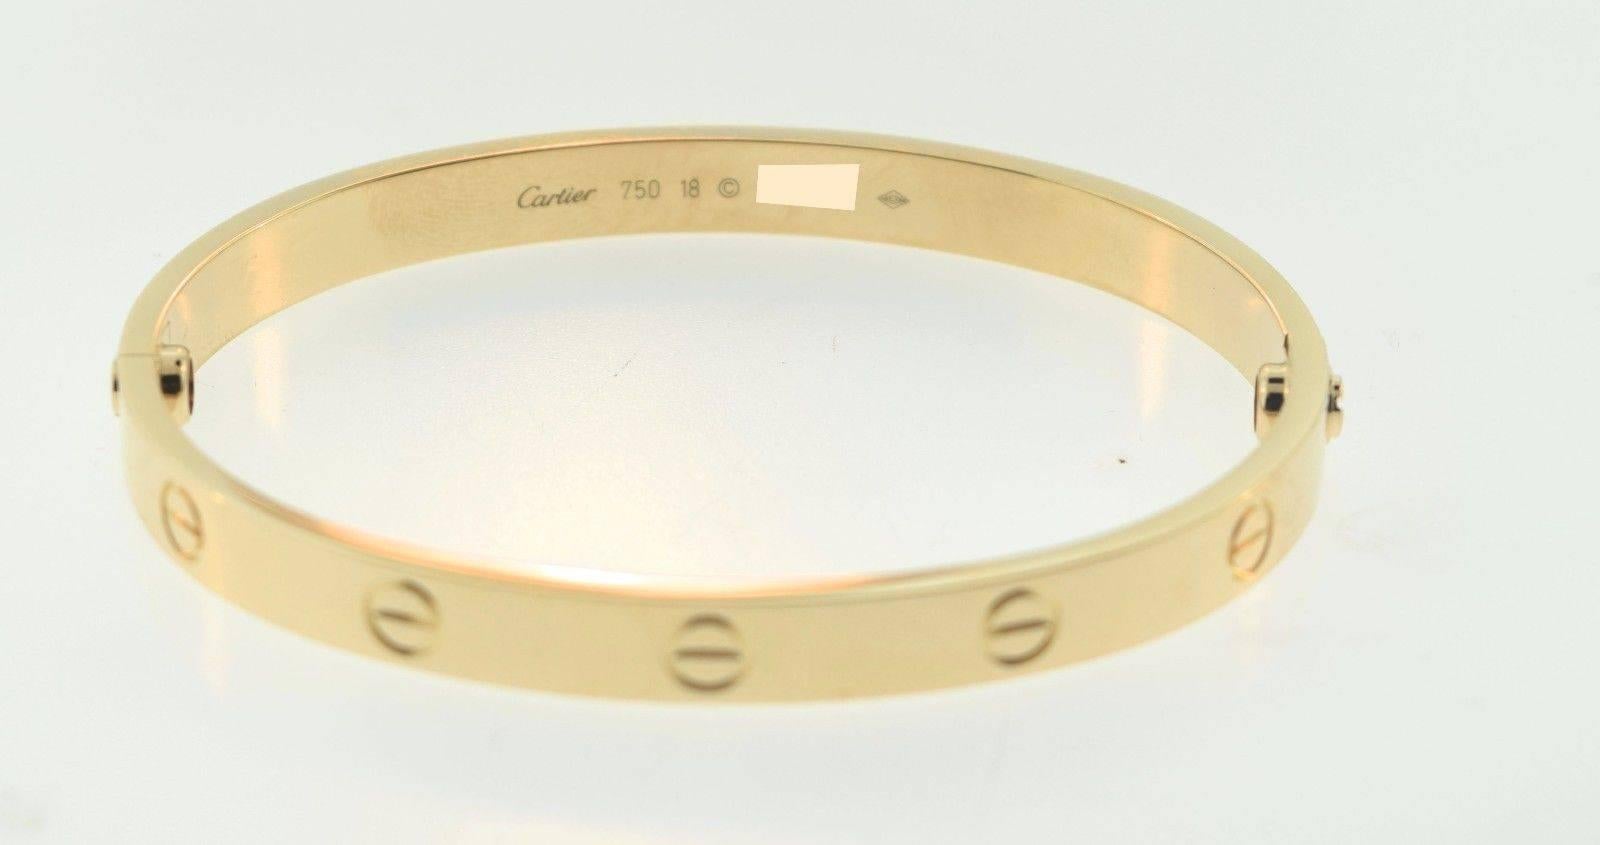 About the Item:
This bracelet is a universal symbol of love and commitment. The LOVE bracelet, created in 1970s New York, has sealed the passionate romances of a host of iconic couples. The LOVE bracelet is a flat bangle studded with screws that